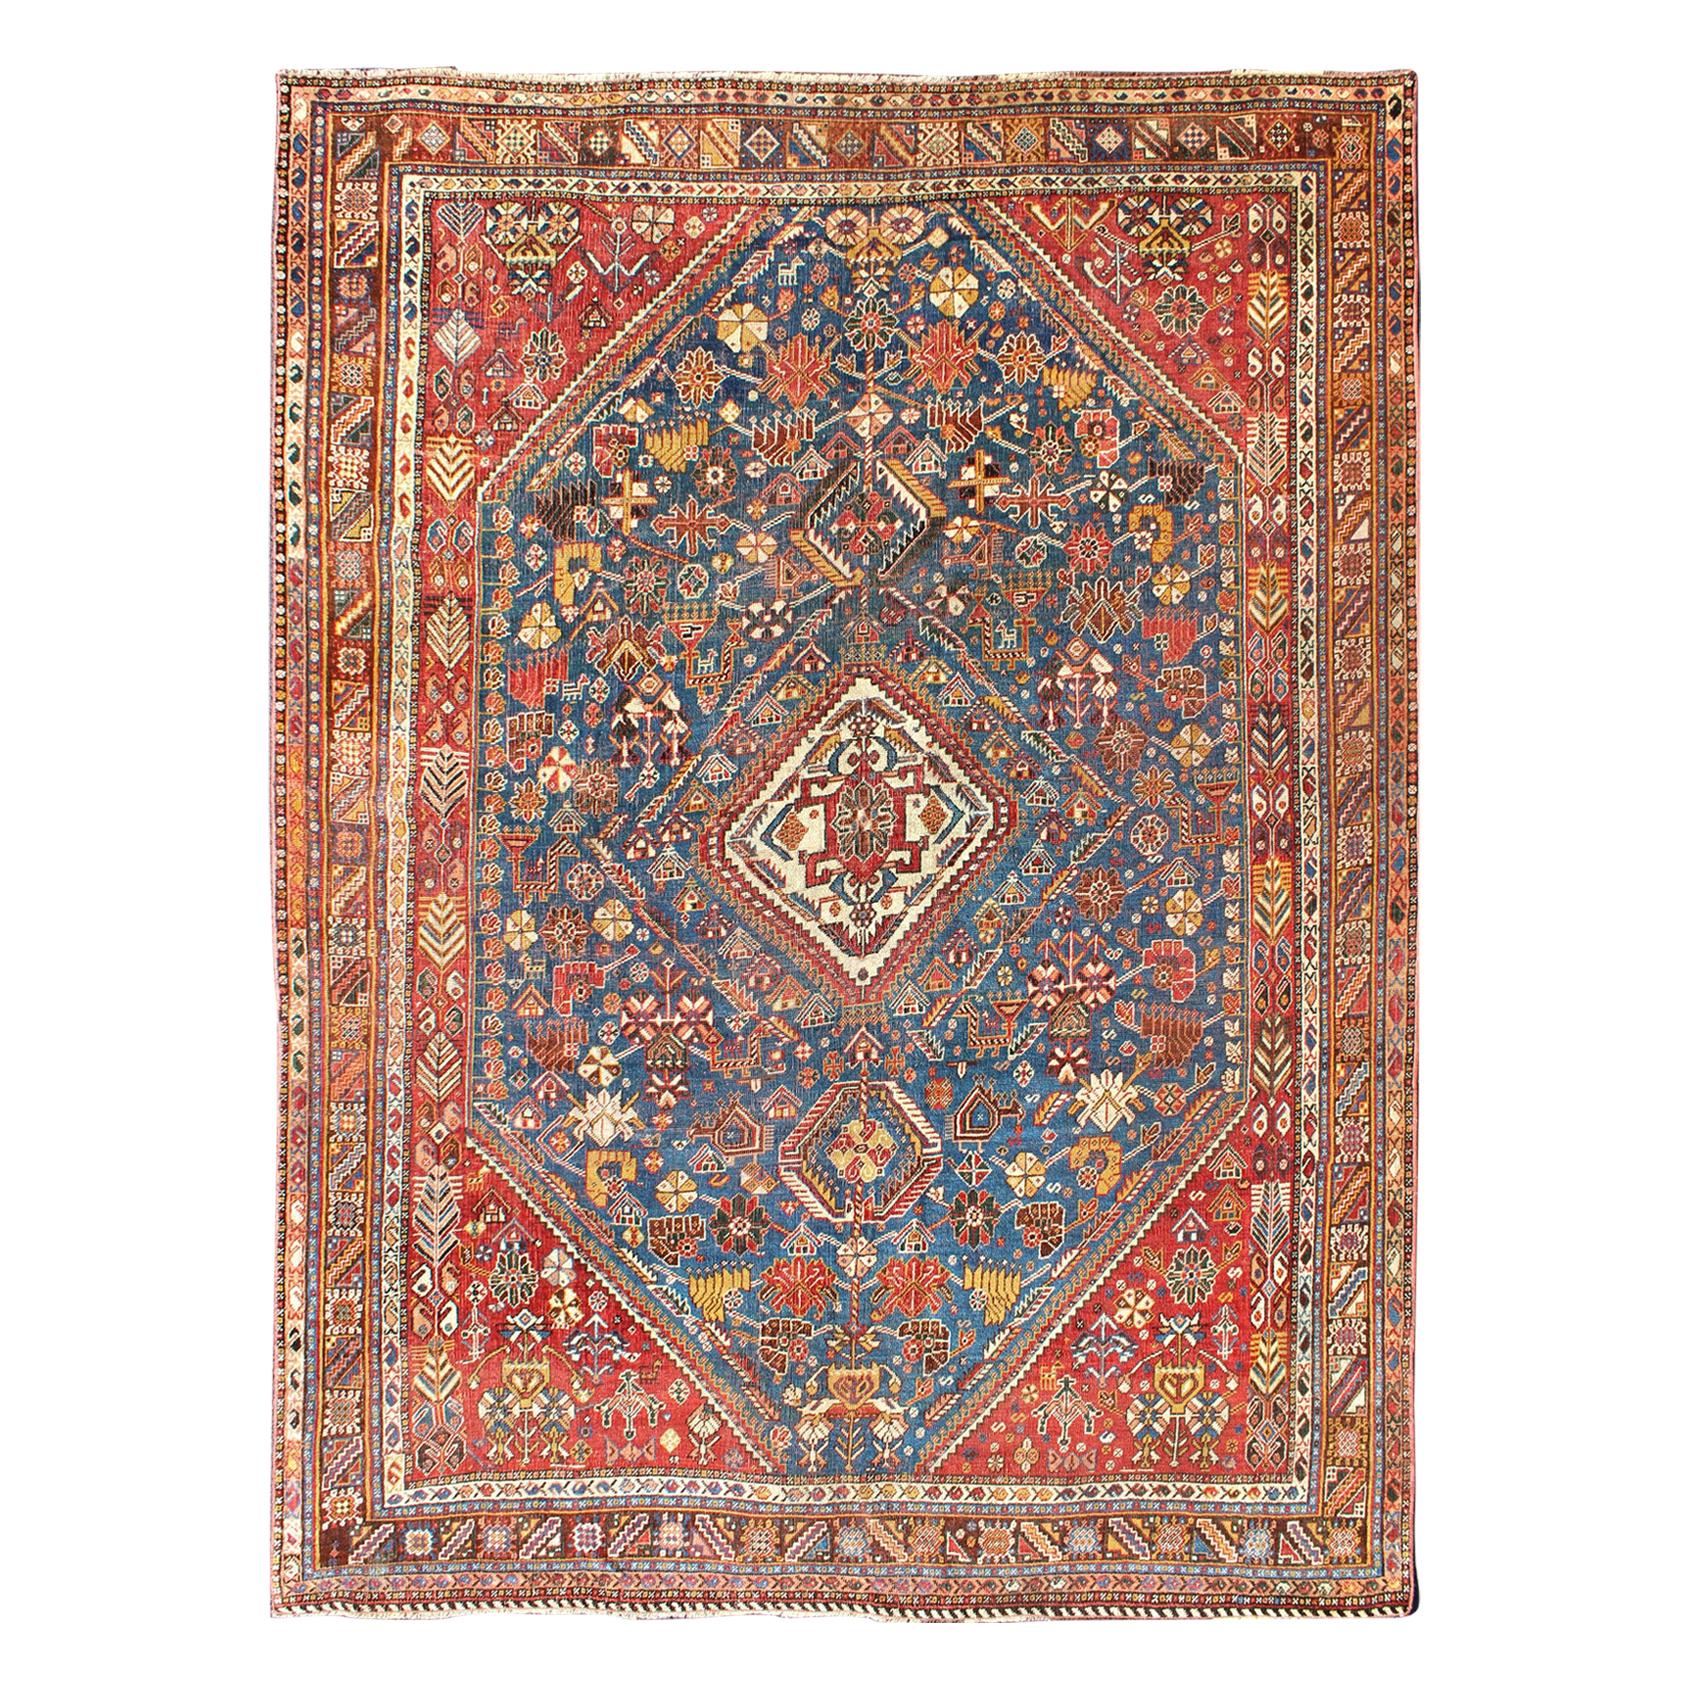 Antique Persian Qashqai Rug with Medallion Design in Rich Colors, Blue and Red